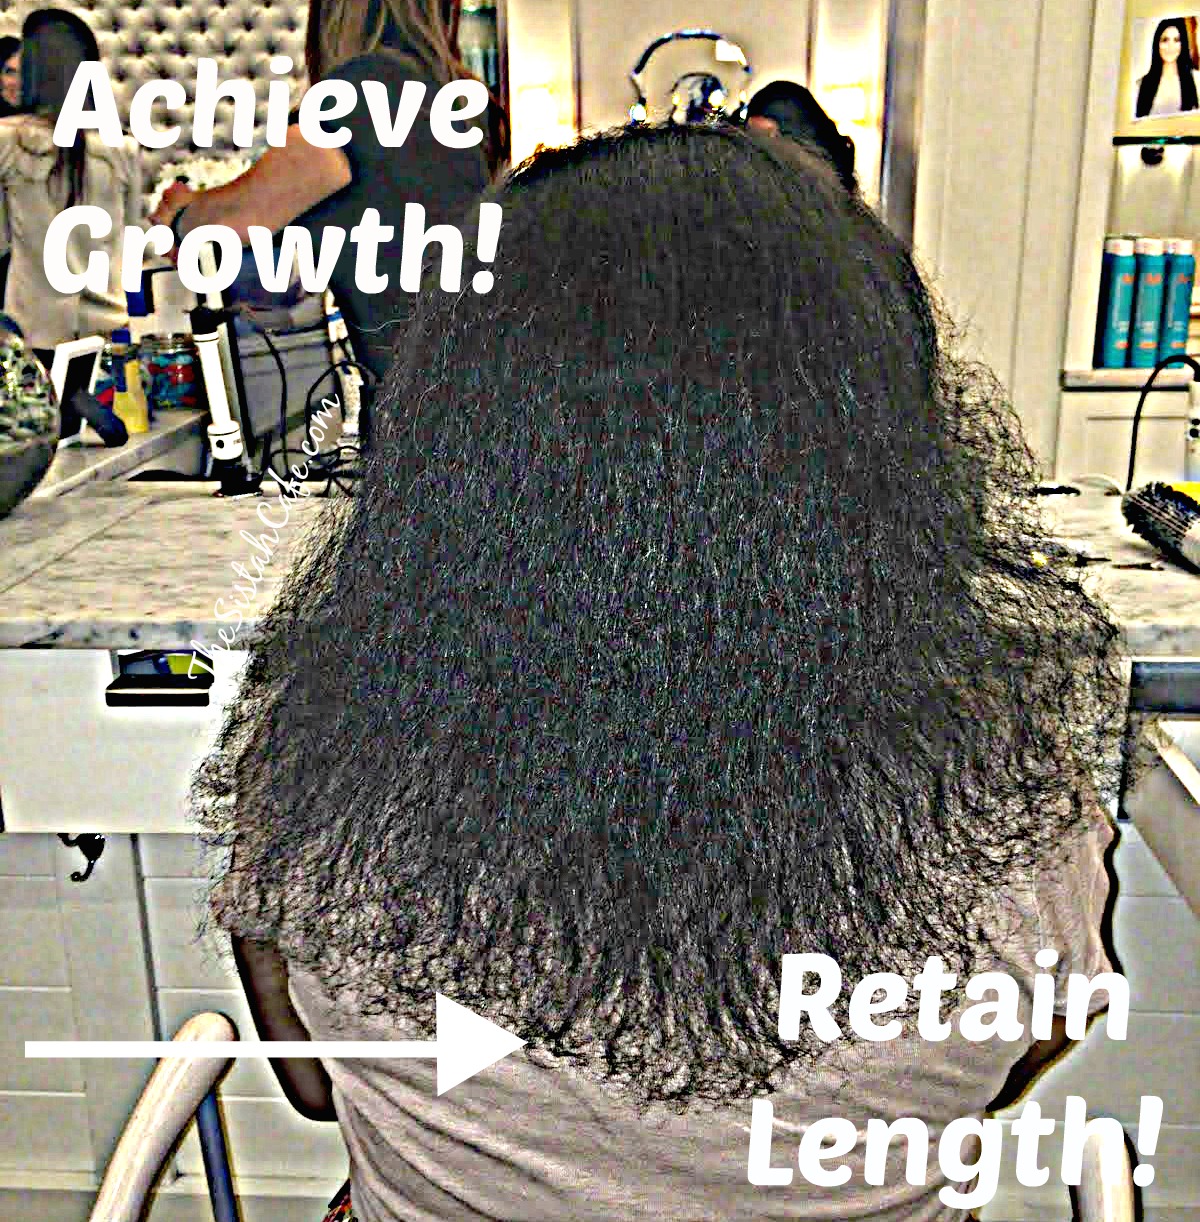 Natural Hair: 4 Ways to Achieve Growth & Retain Length - The Sistah Cafe